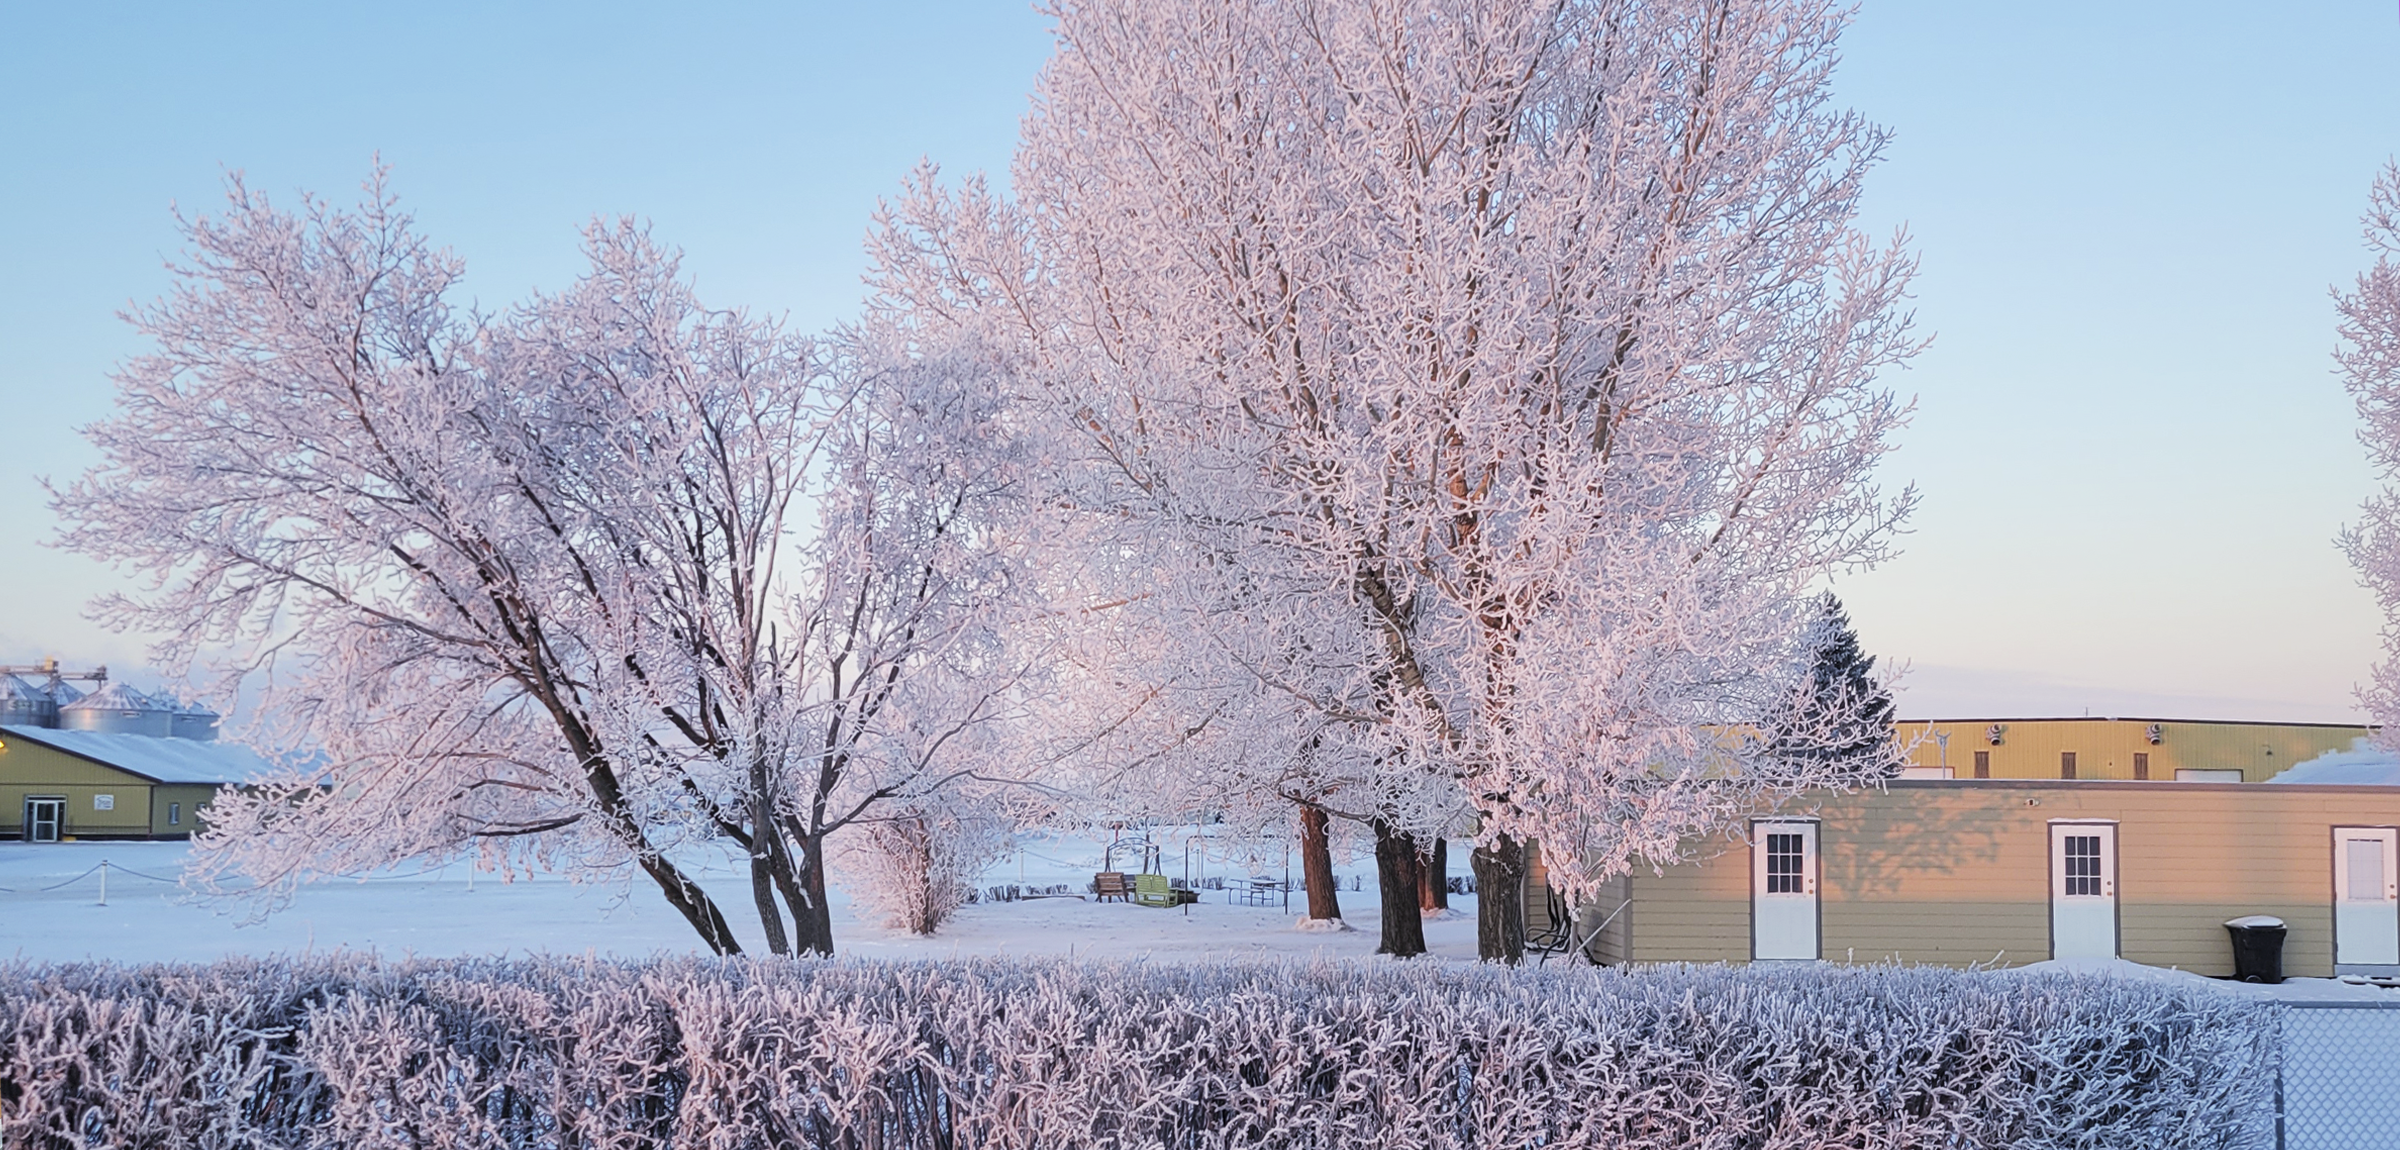 A winter scene. In the foreground are a line of frozen shrubery and two trees that are also frosted. In the background is a blue sky and two building of a farm